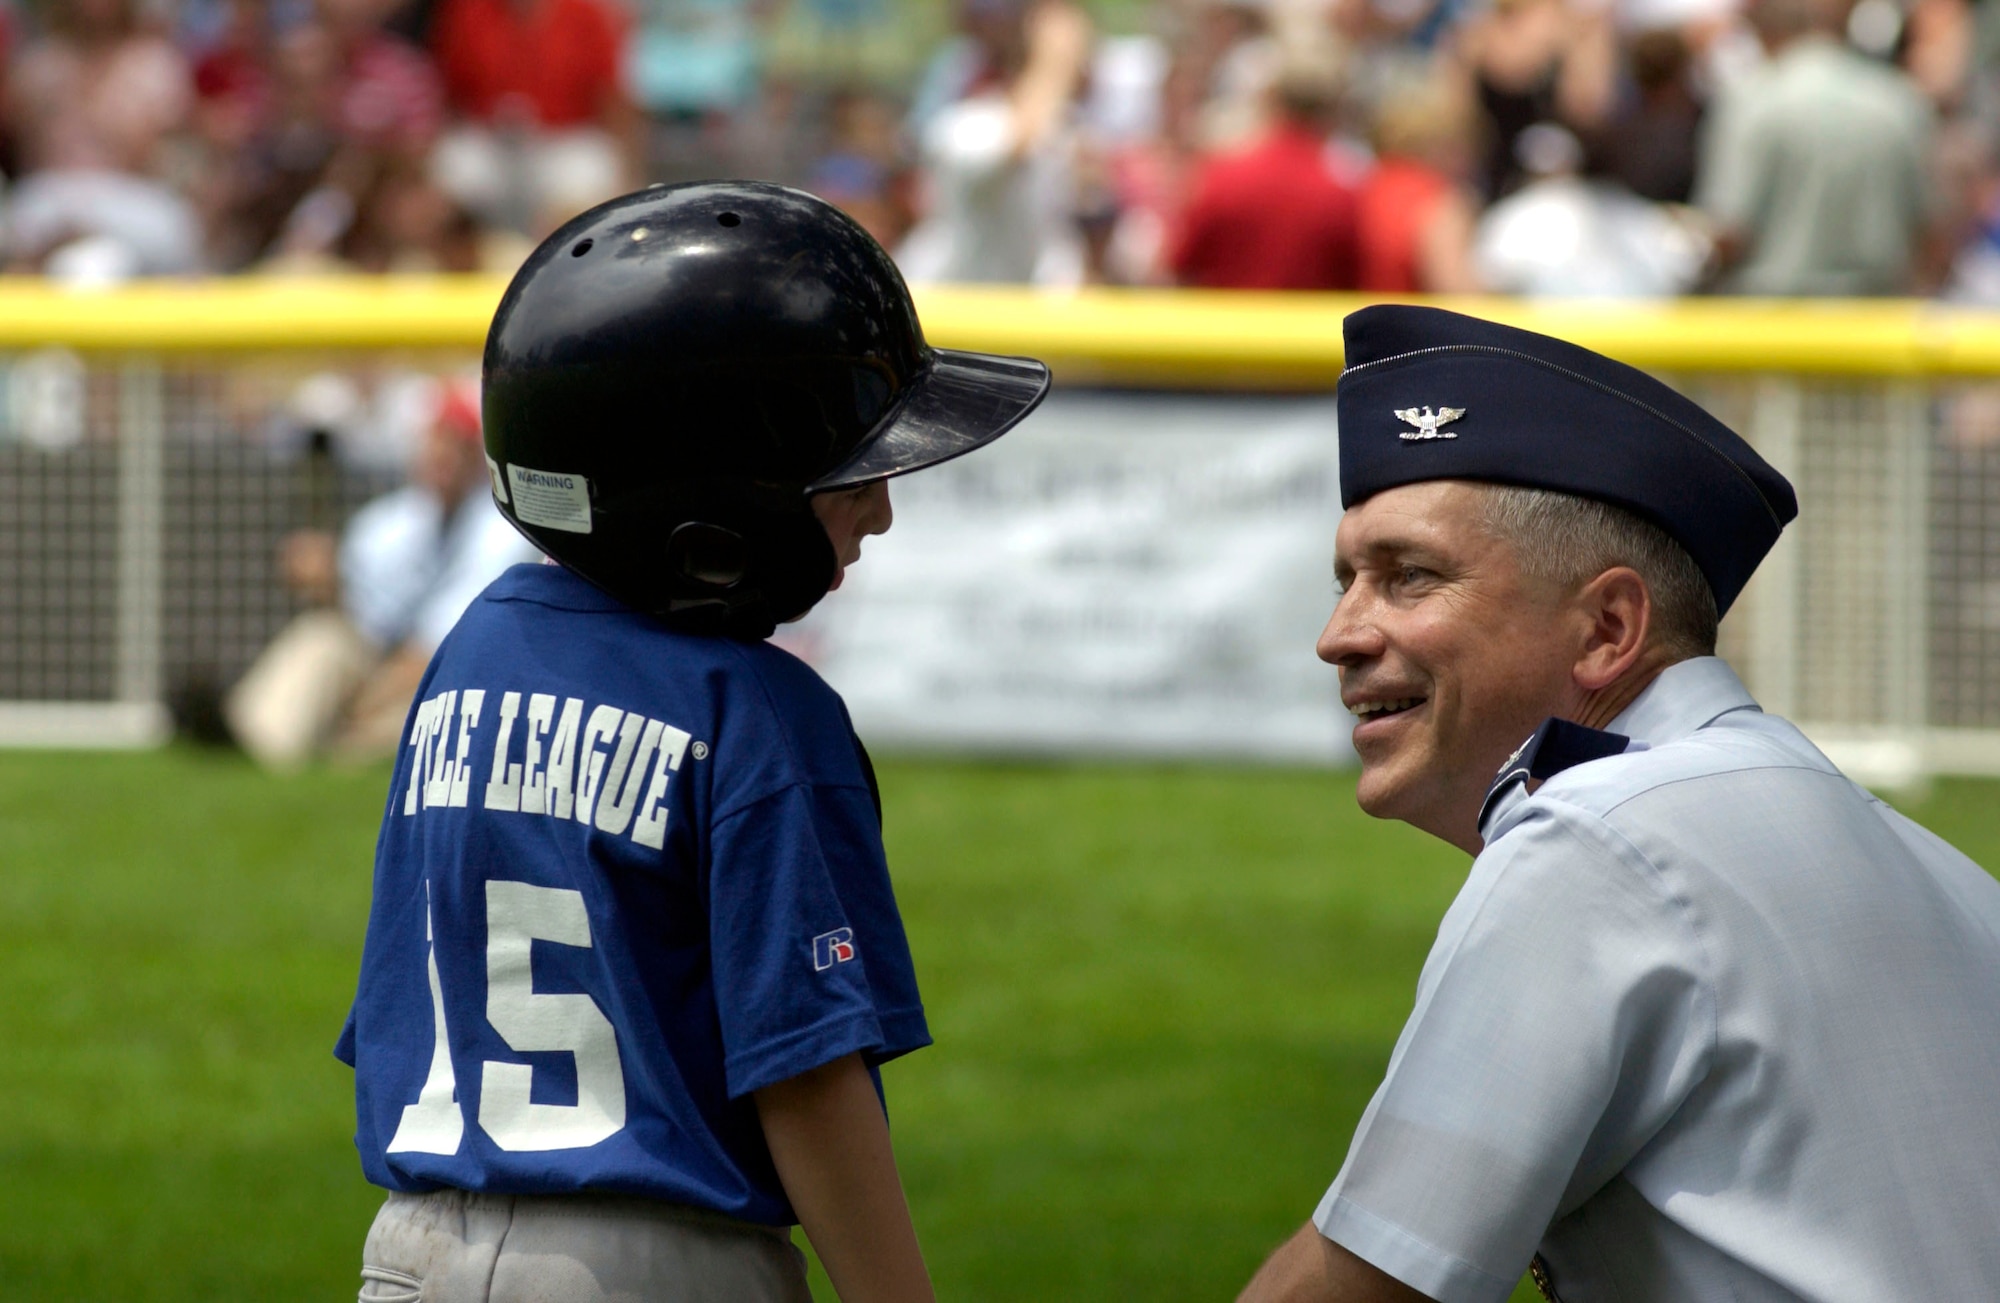 Col. Frederick Martin talks with Jakob Pohlman of the Dolcom Little League Indians at third base during a game on the South Lawn of the White House on Friday, June 23, marking the official start of the Little League season.  Colonel Martin, assigned at McGuire Air Force Base, N.J., served as the third base coach for both the Indians from Naval Submarine Base New London in Groton, Conn., and the Yankees from McGuire. (U.S. Air Force photo/Tech. Sgt. Cohen A. Young) 